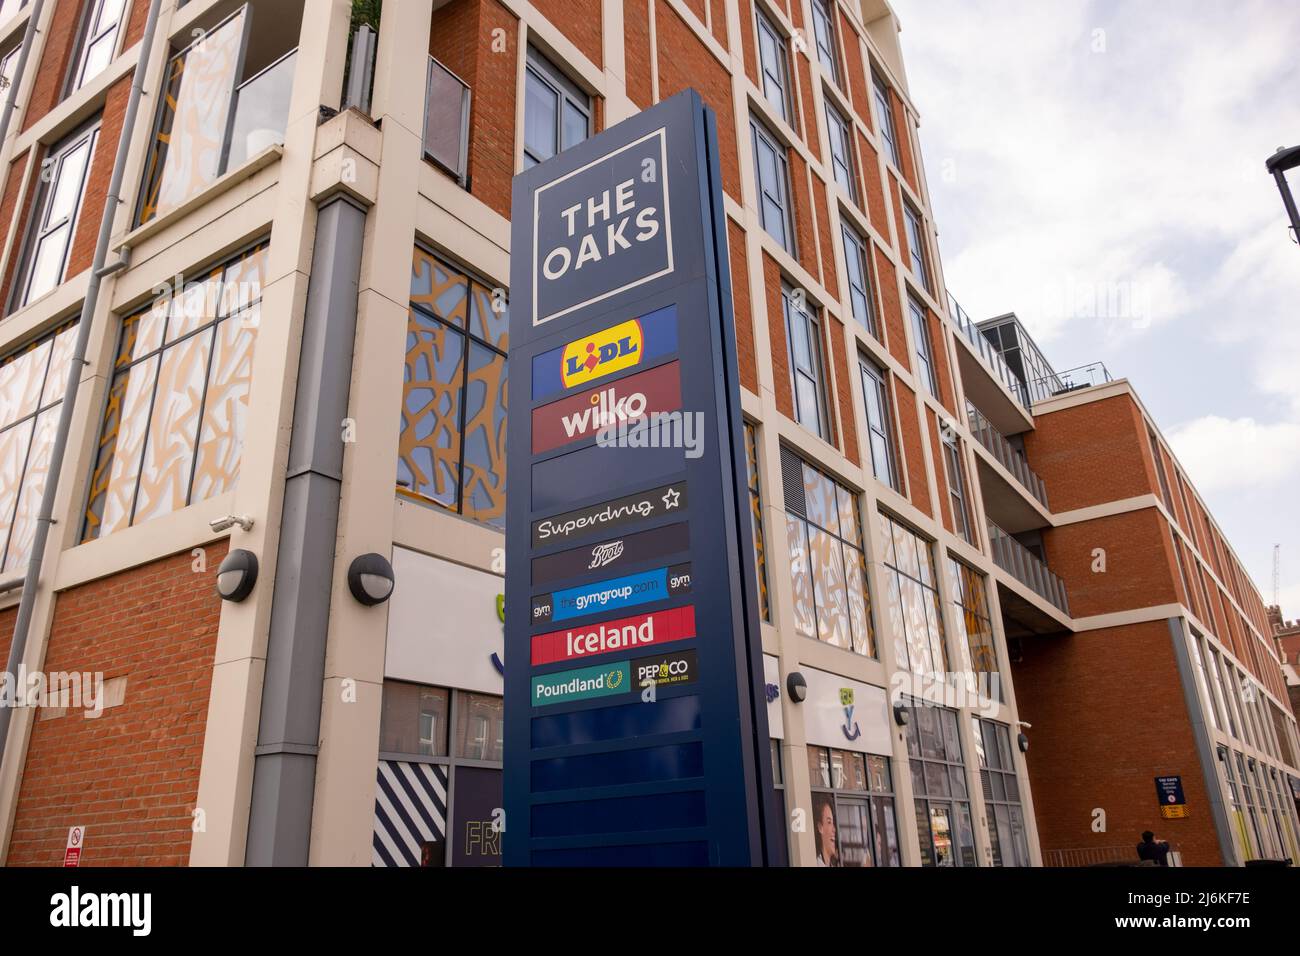 London- April 2022: The Oaks Shopping centre in Acton, west London Stock Photo